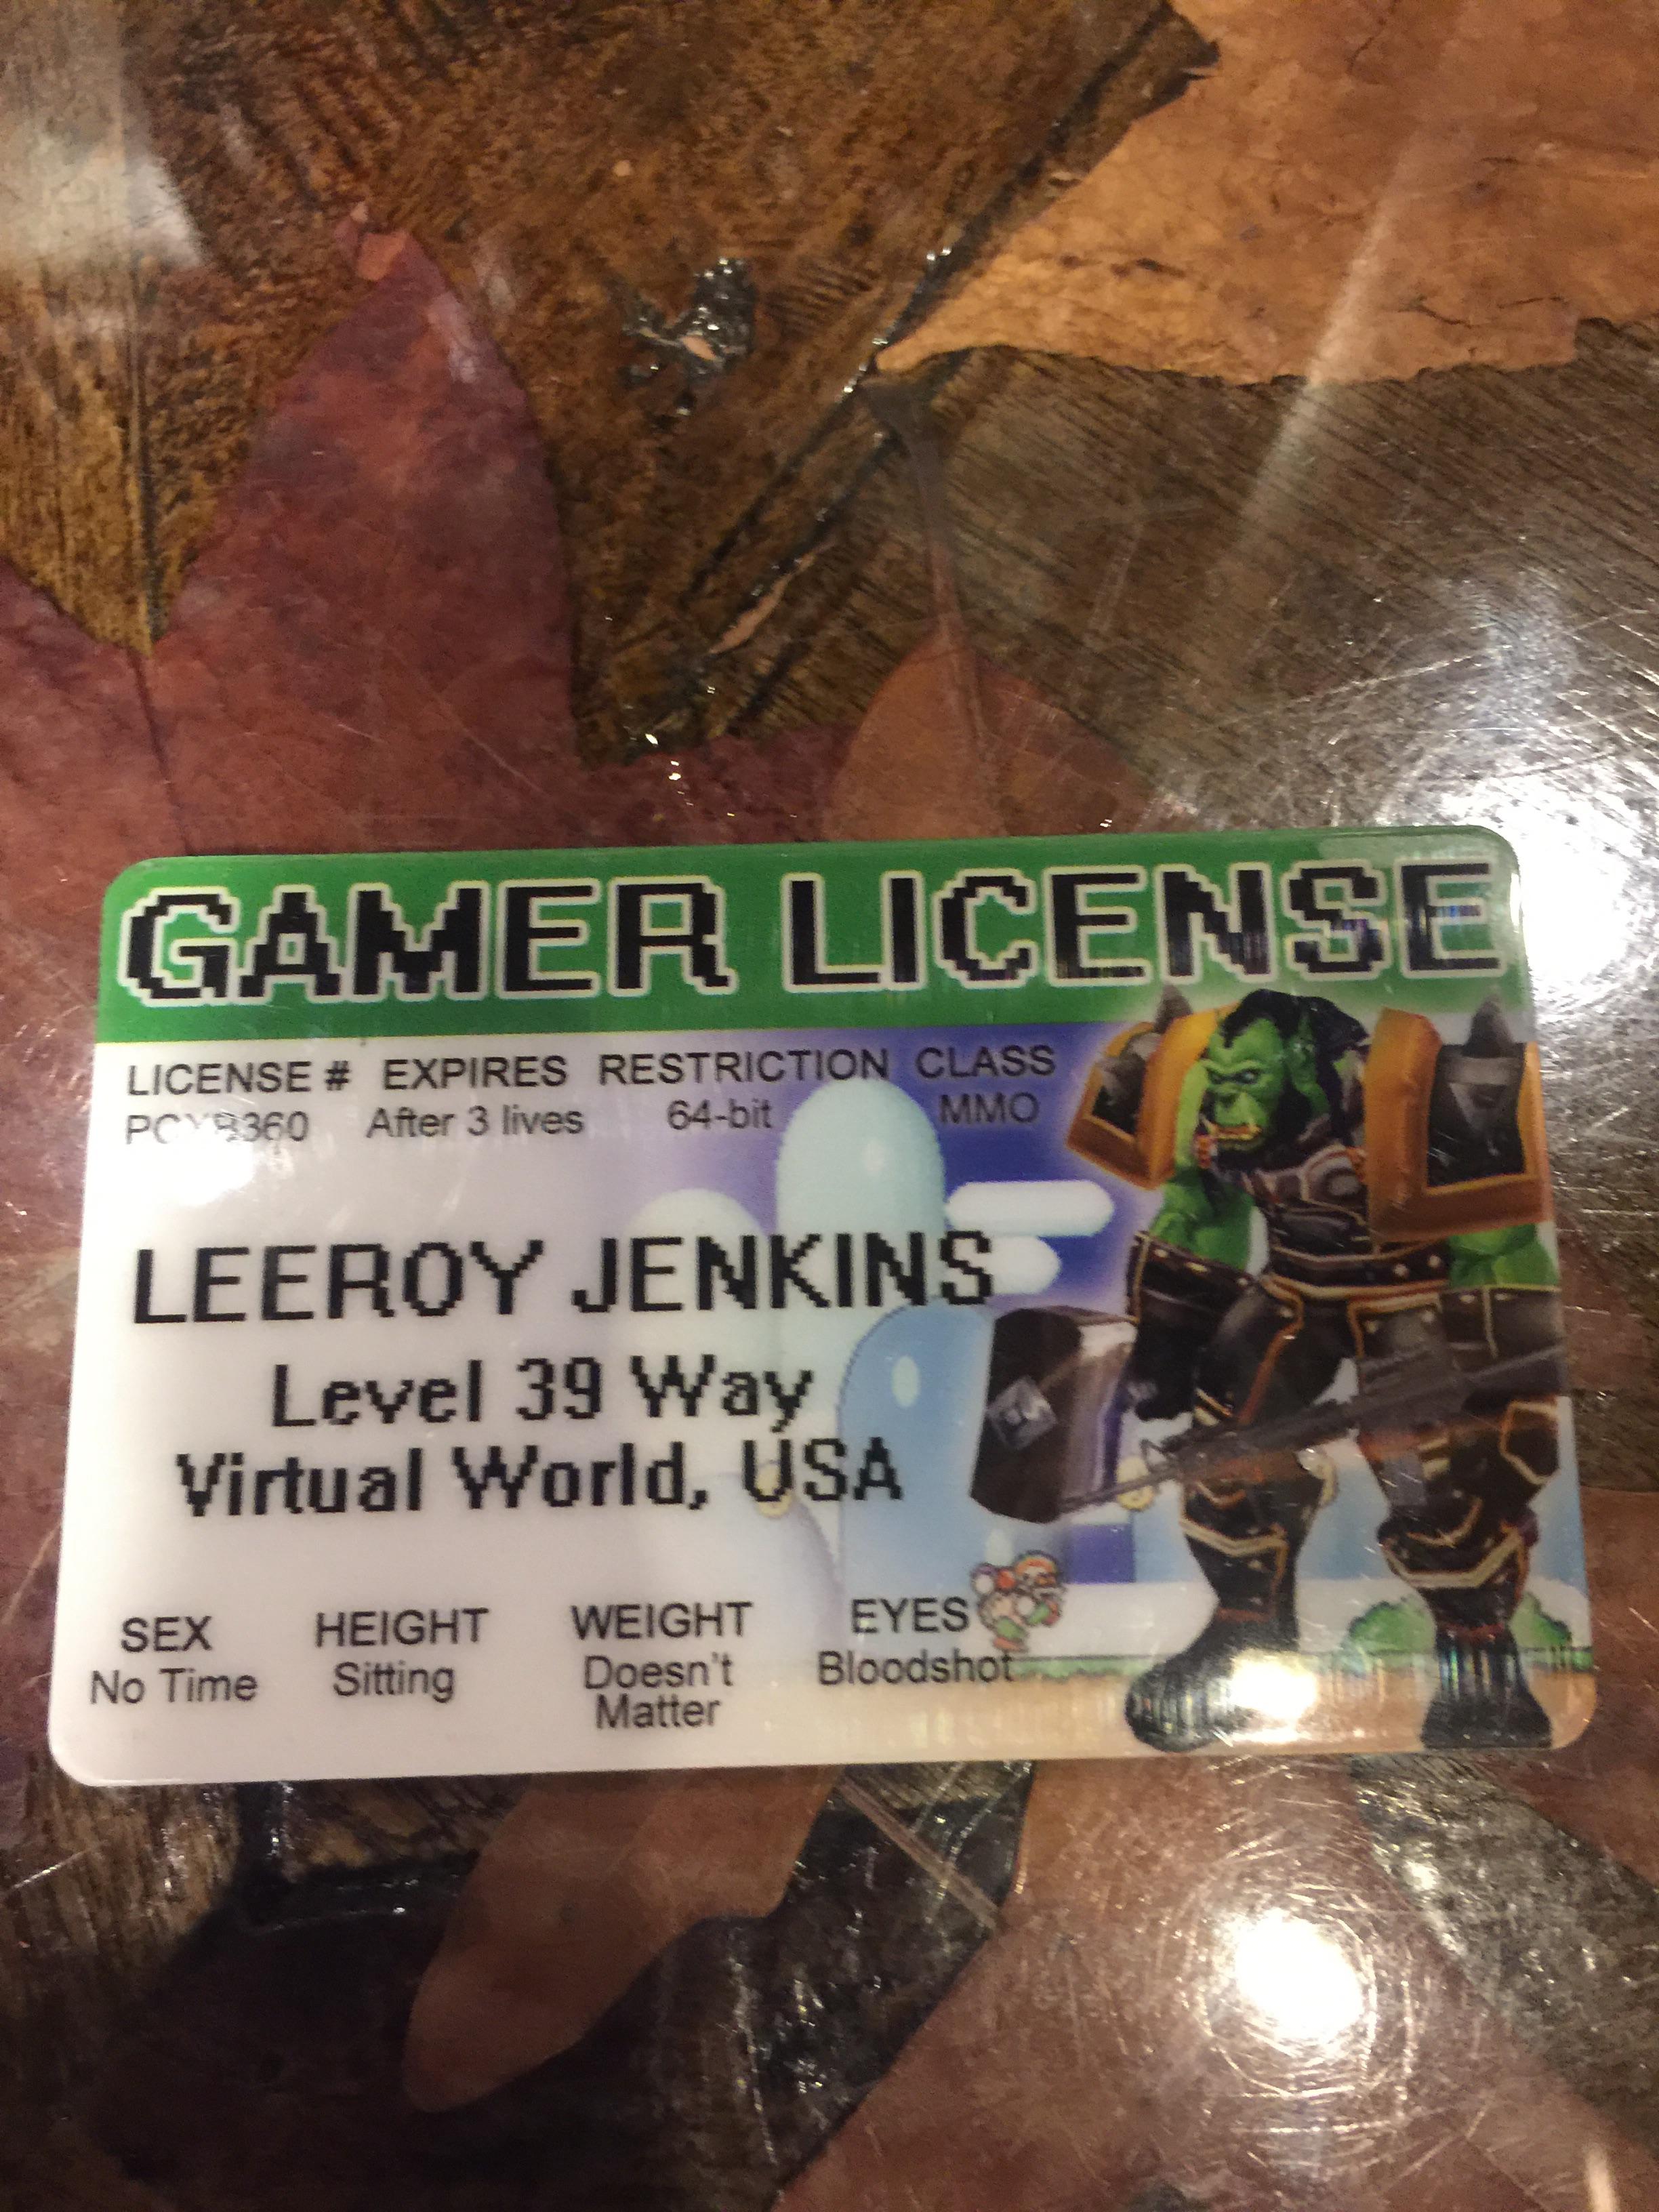 epic gamer license - Gamer License License Expires Restriction Glass PC990 Ater 3 lives 64bit Leeroy Jenkins Level 39 Way Virtual World, Usa Sex Height Weight Eyes No Time Sitting Doesn't Bloodshot Matter